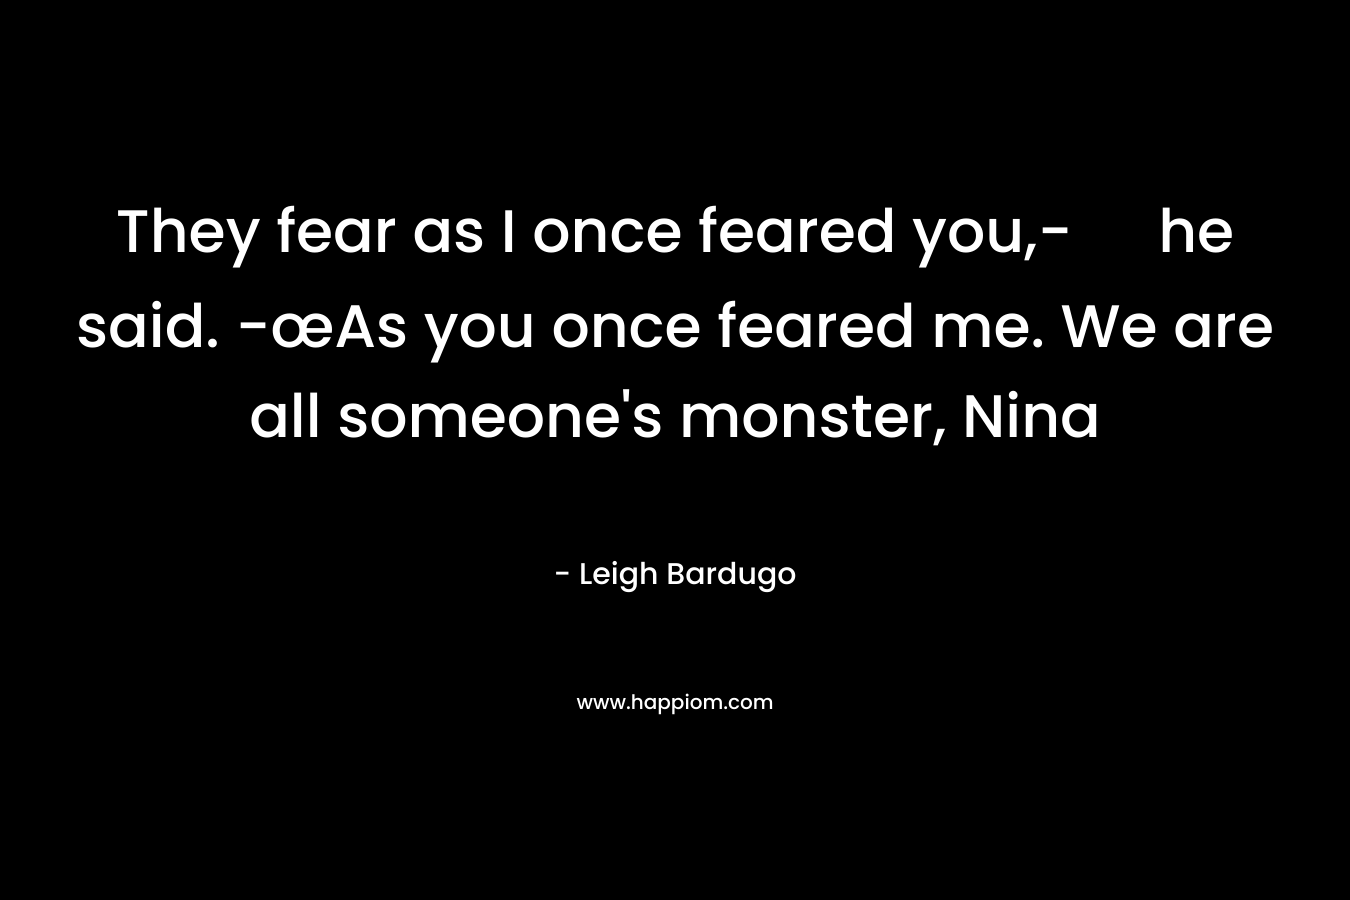 They fear as I once feared you,- he said. -œAs you once feared me. We are all someone's monster, Nina